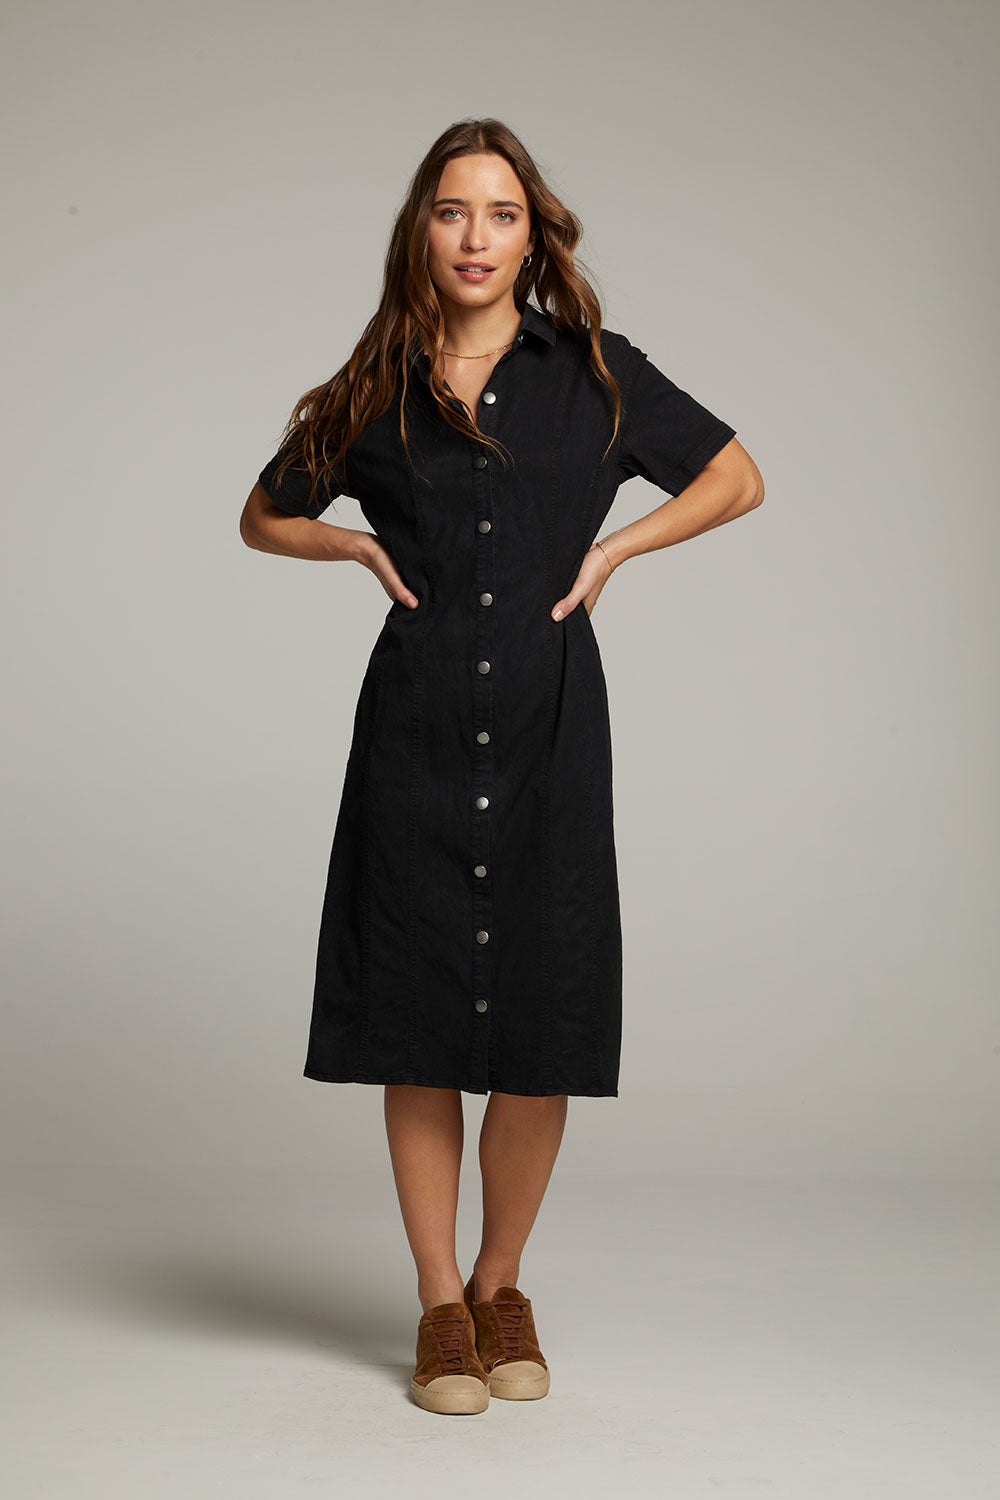 Rachelle Licorice Dress WOMENS chaserbrand